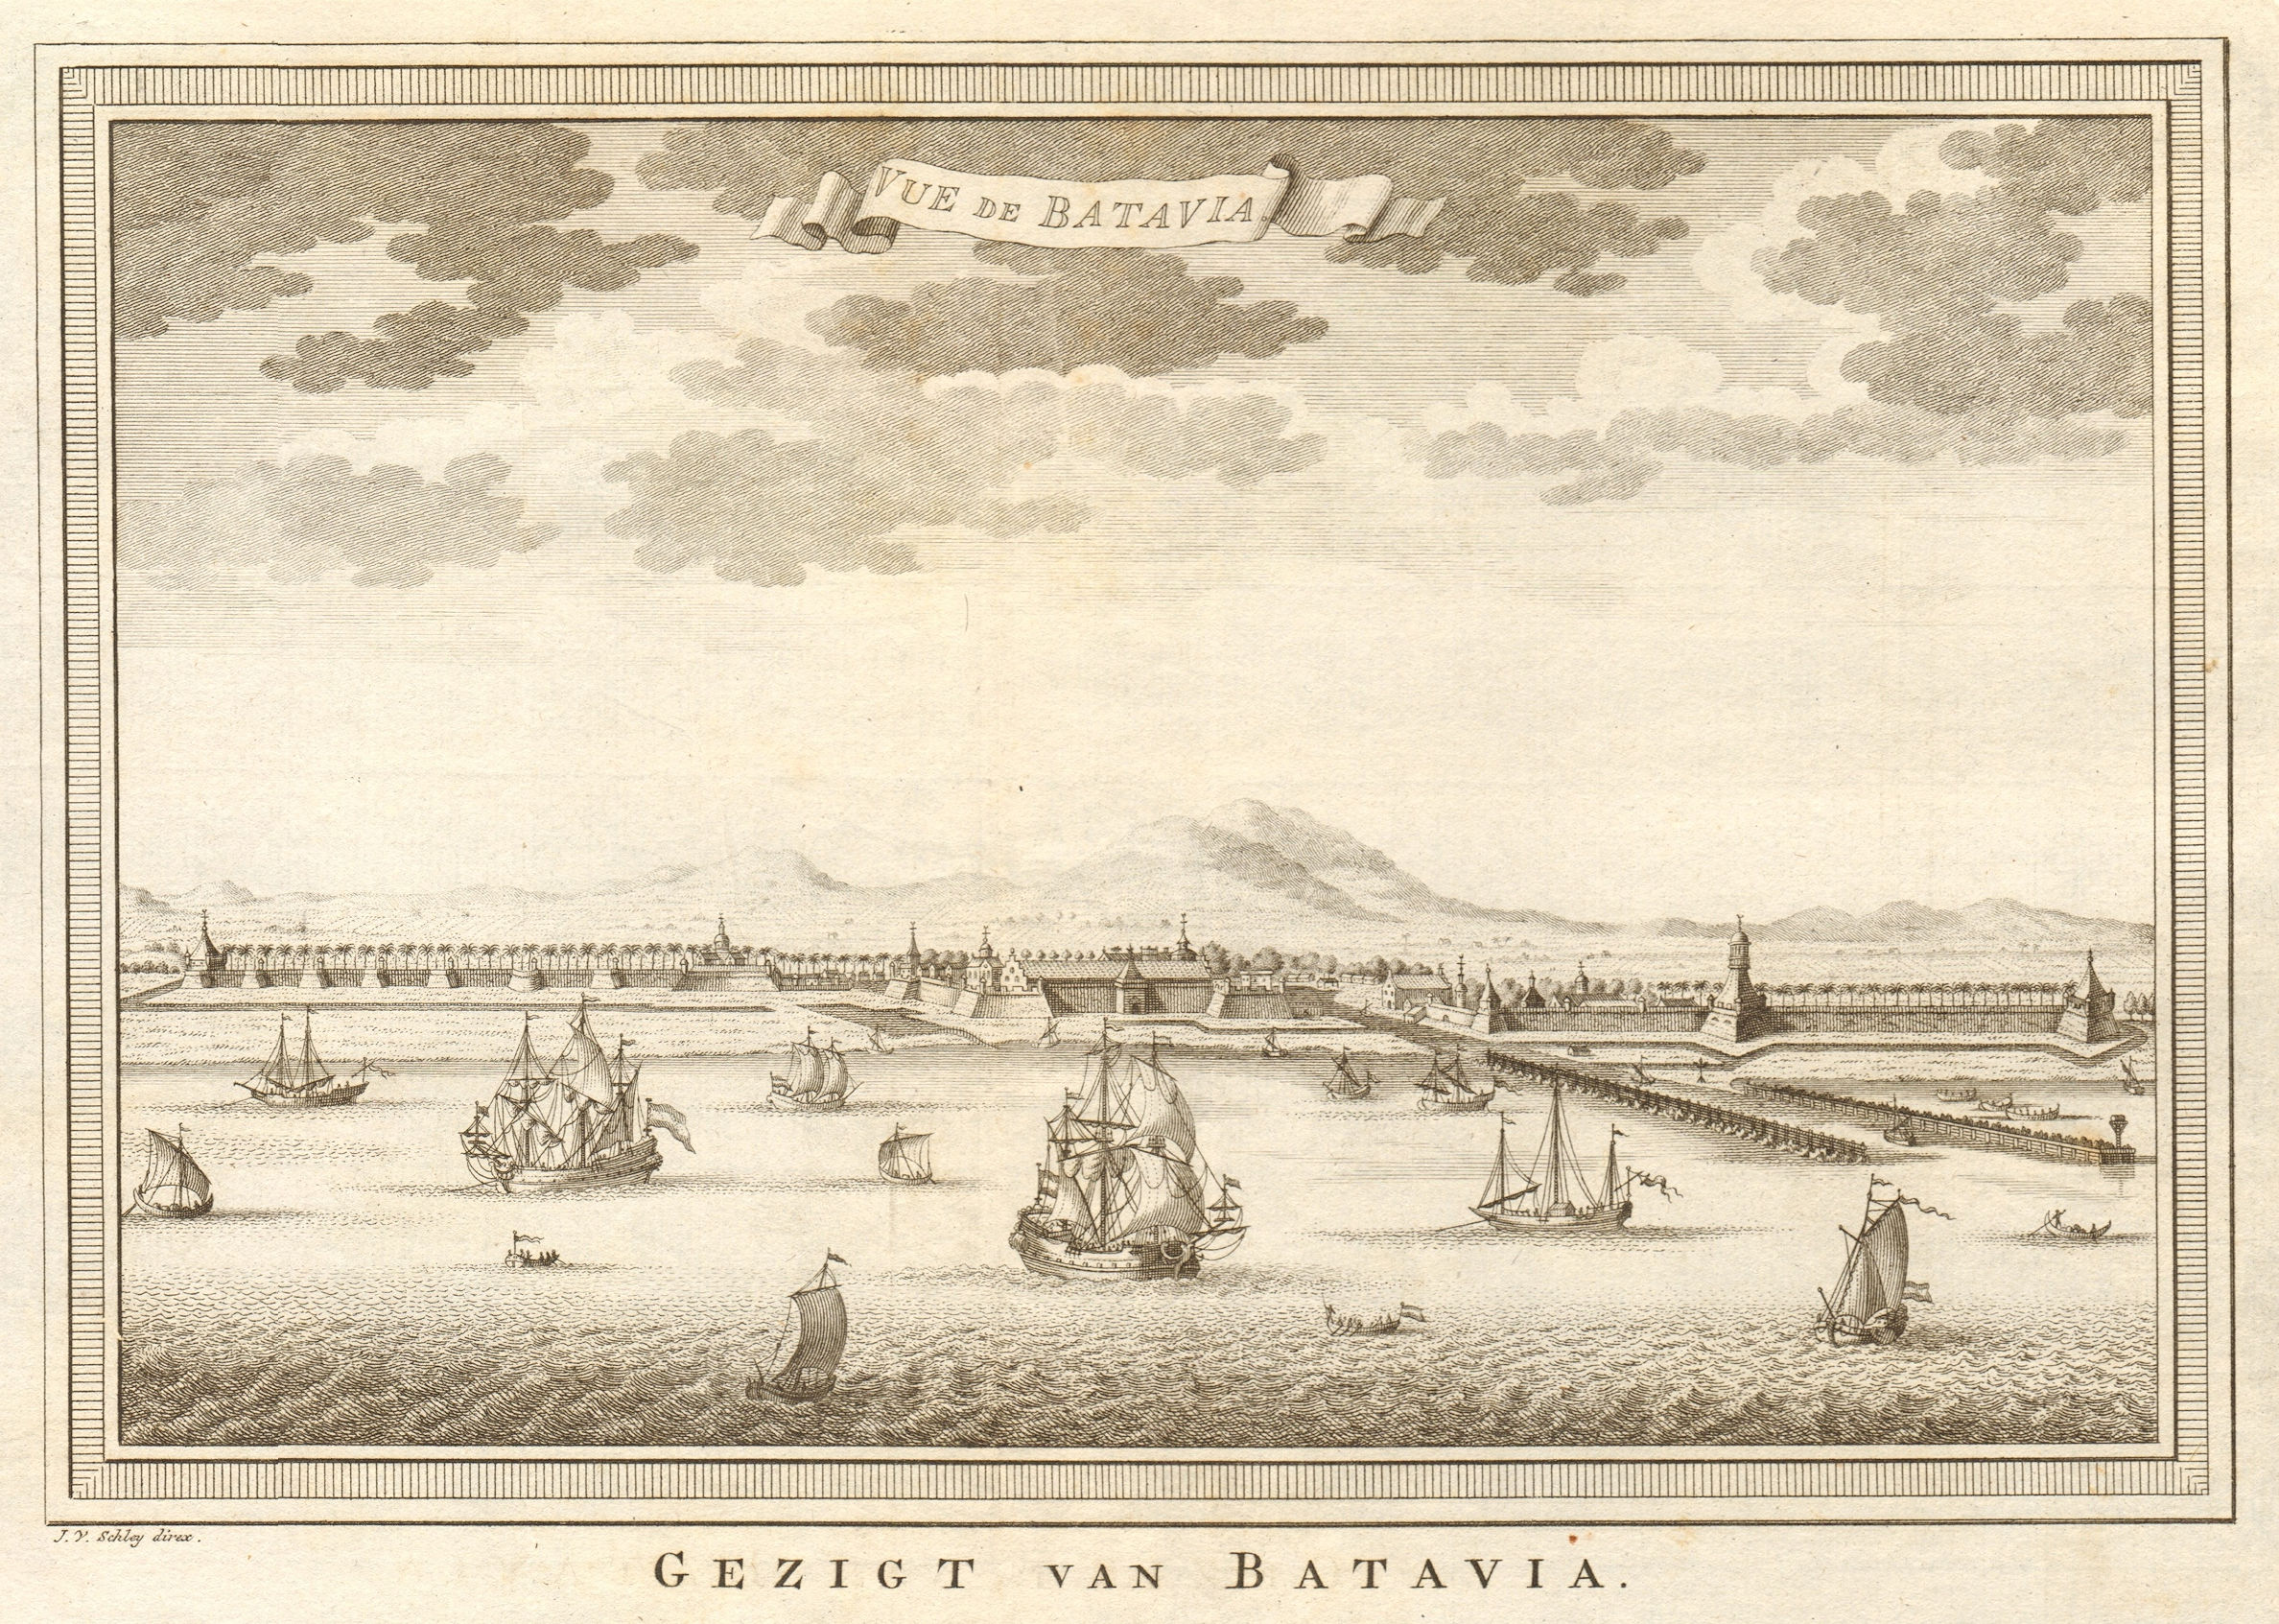 Associate Product View of the city of Batavia, Dutch East Indies. Jakarta, Indonesia. SCHLEY 1753